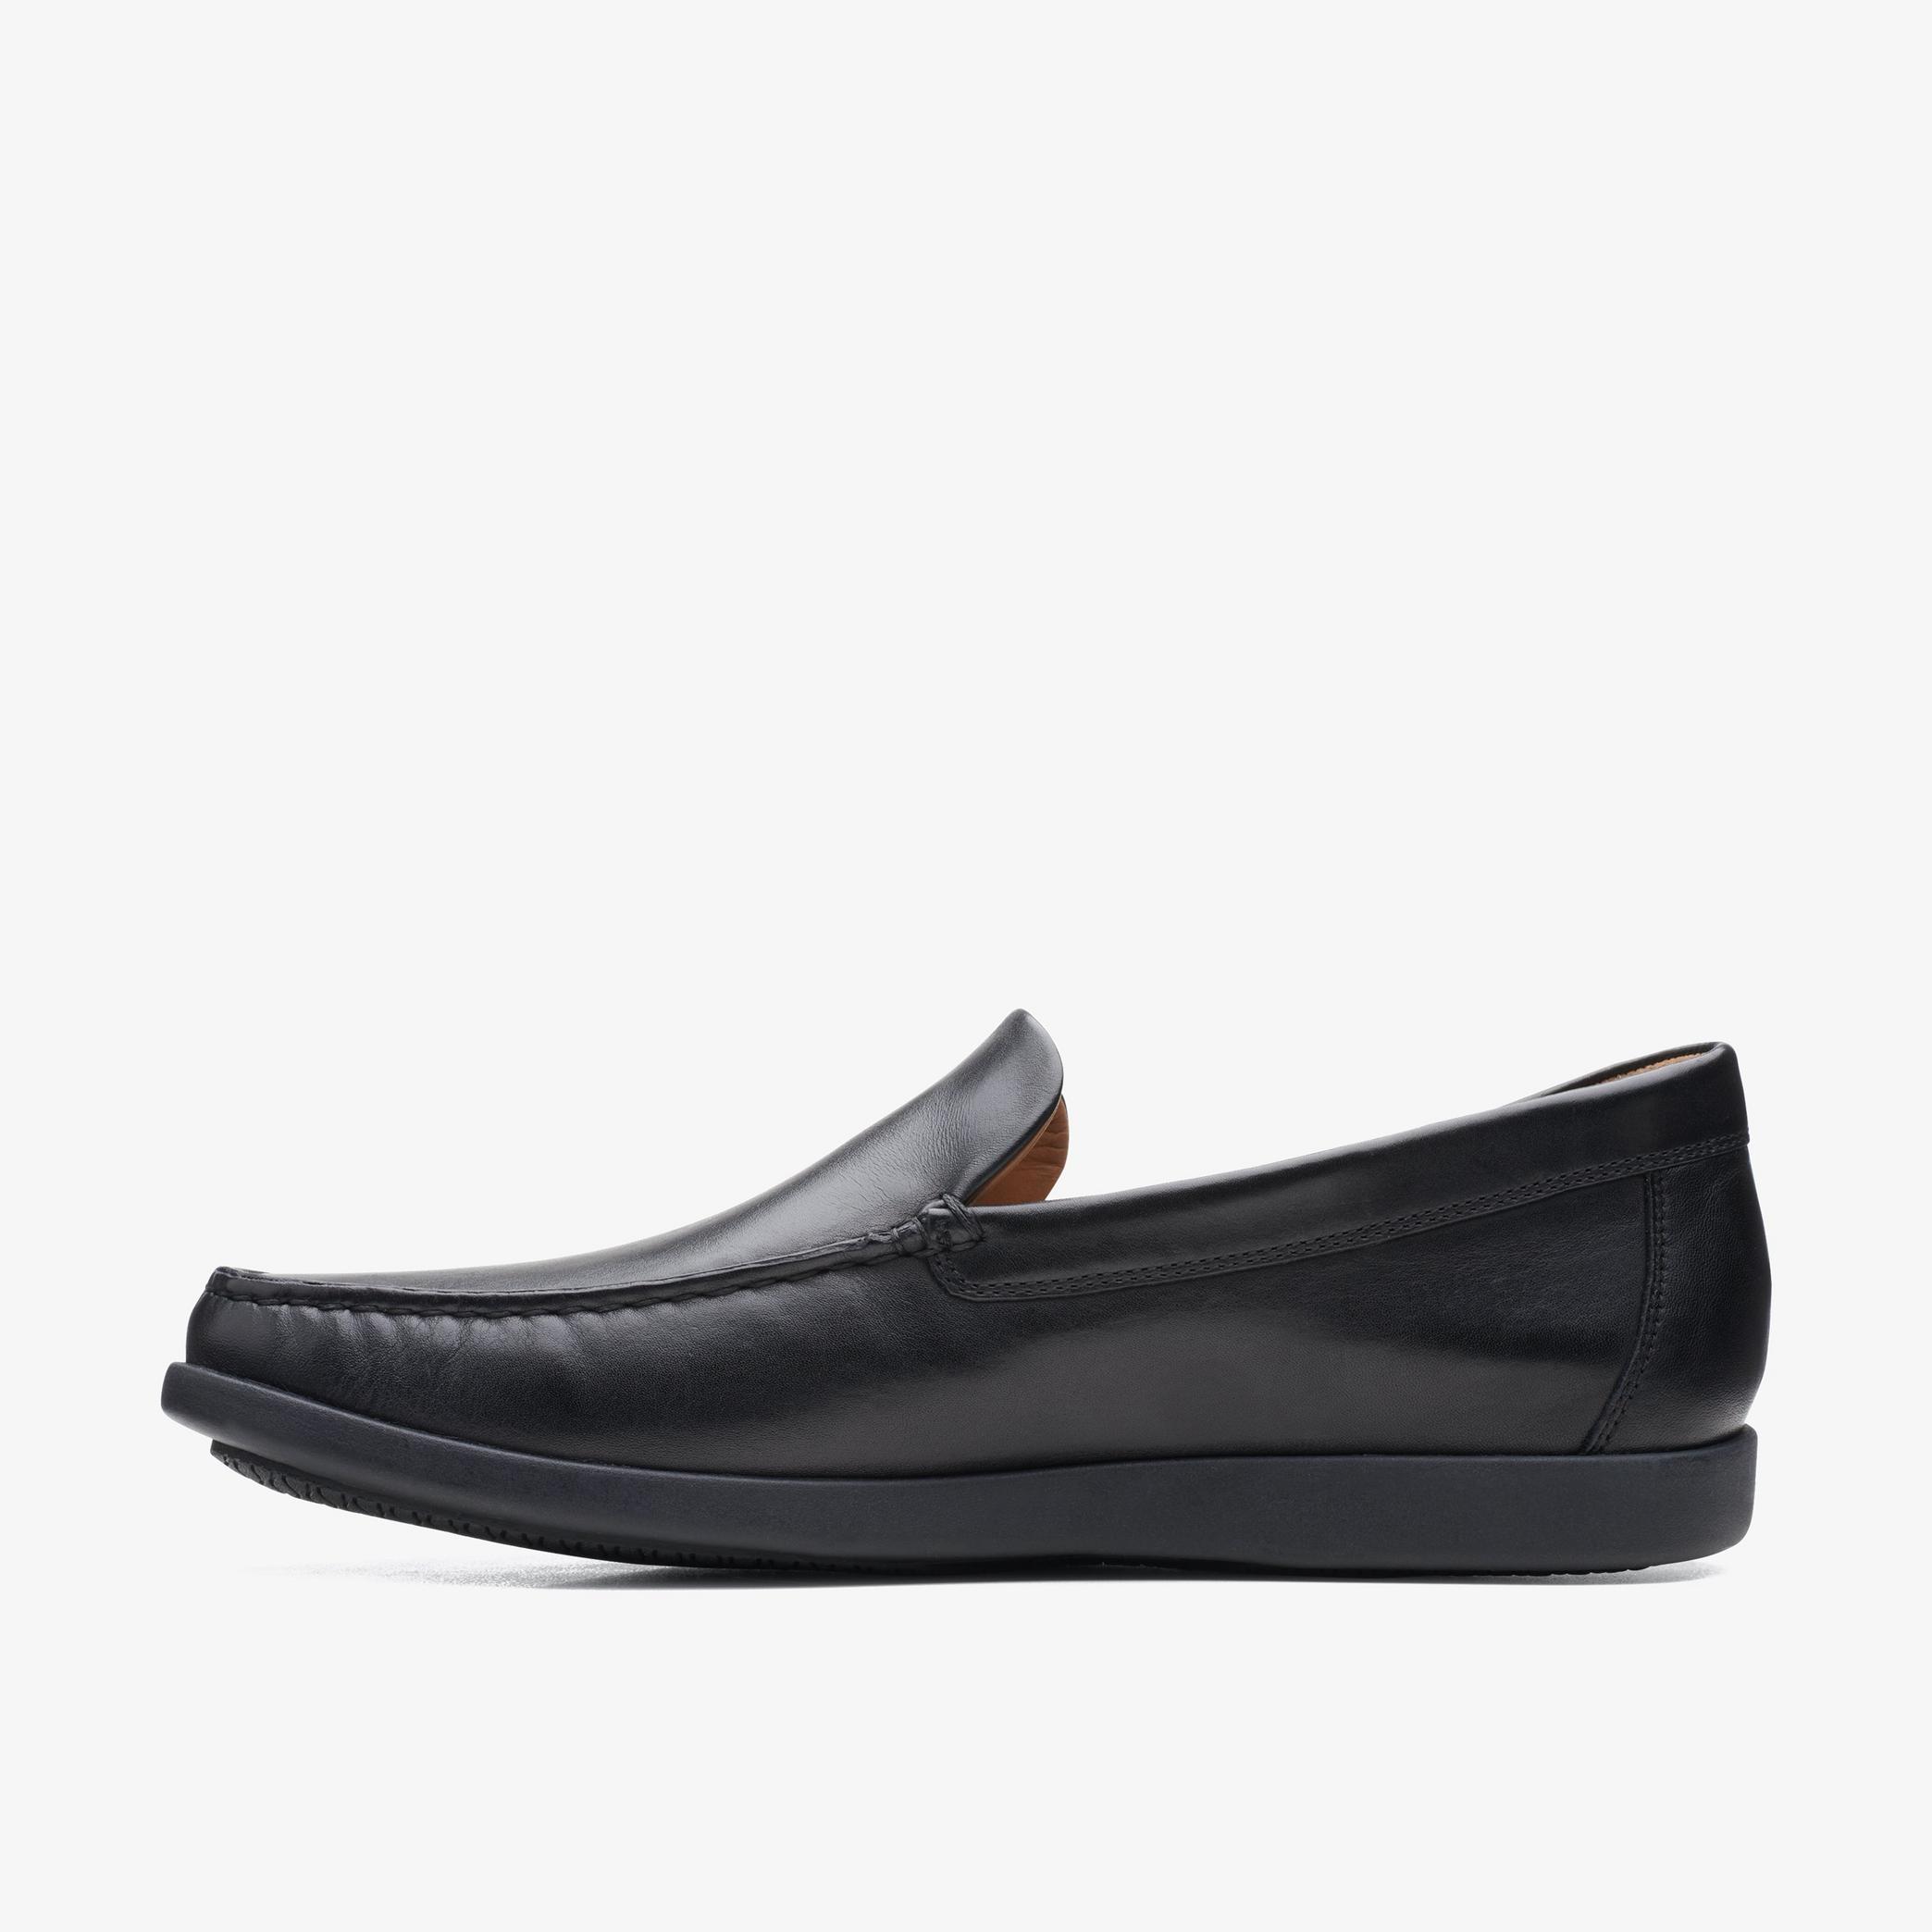 Ferius Creek Black Leather Loafers, view 2 of 6